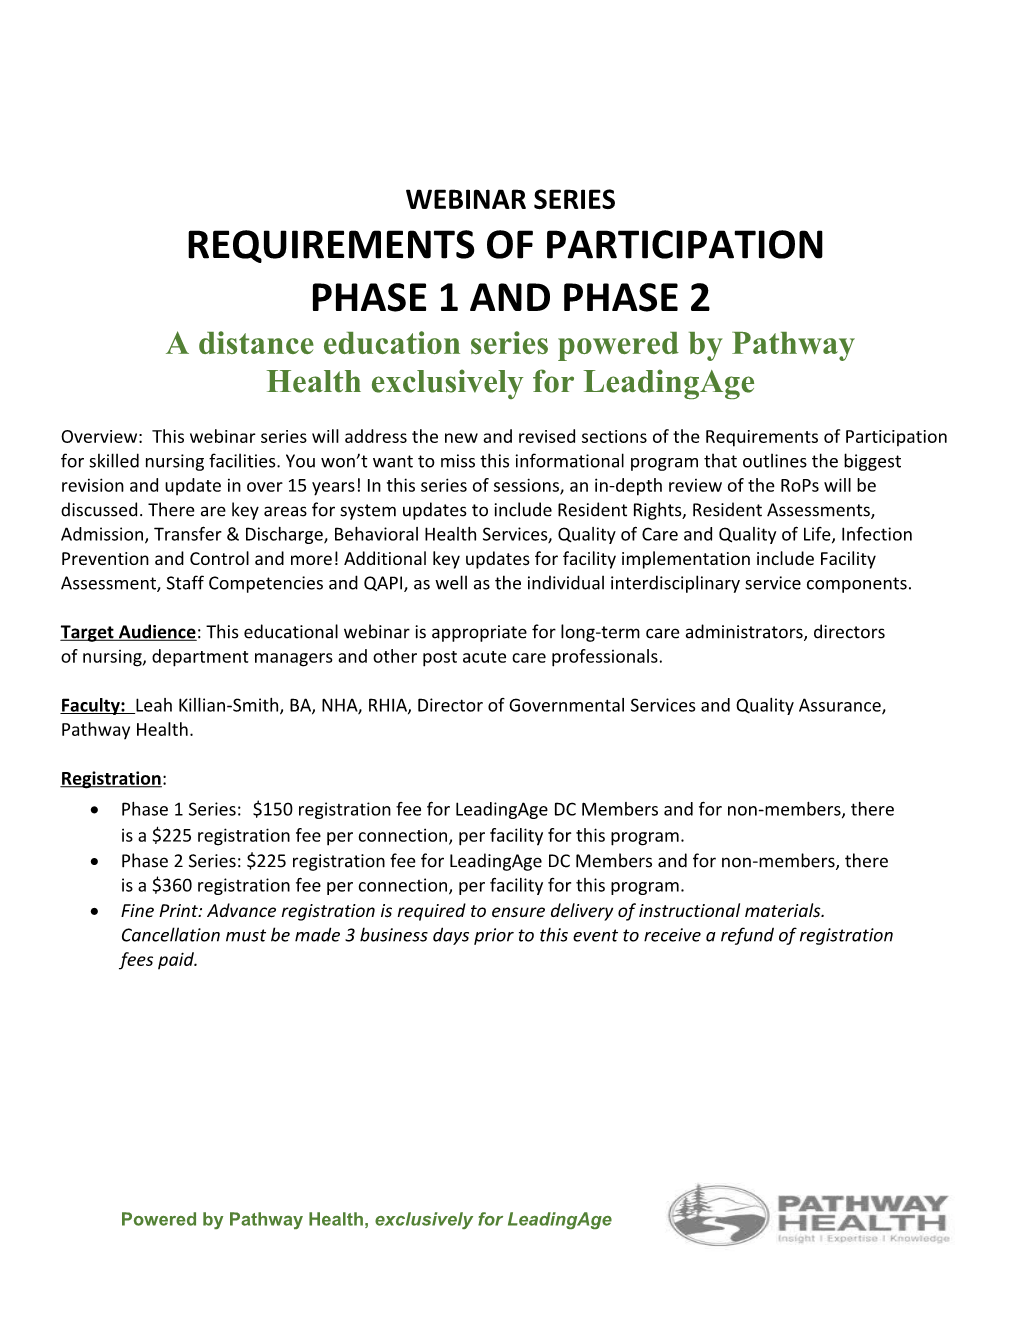 Requirements of Participation